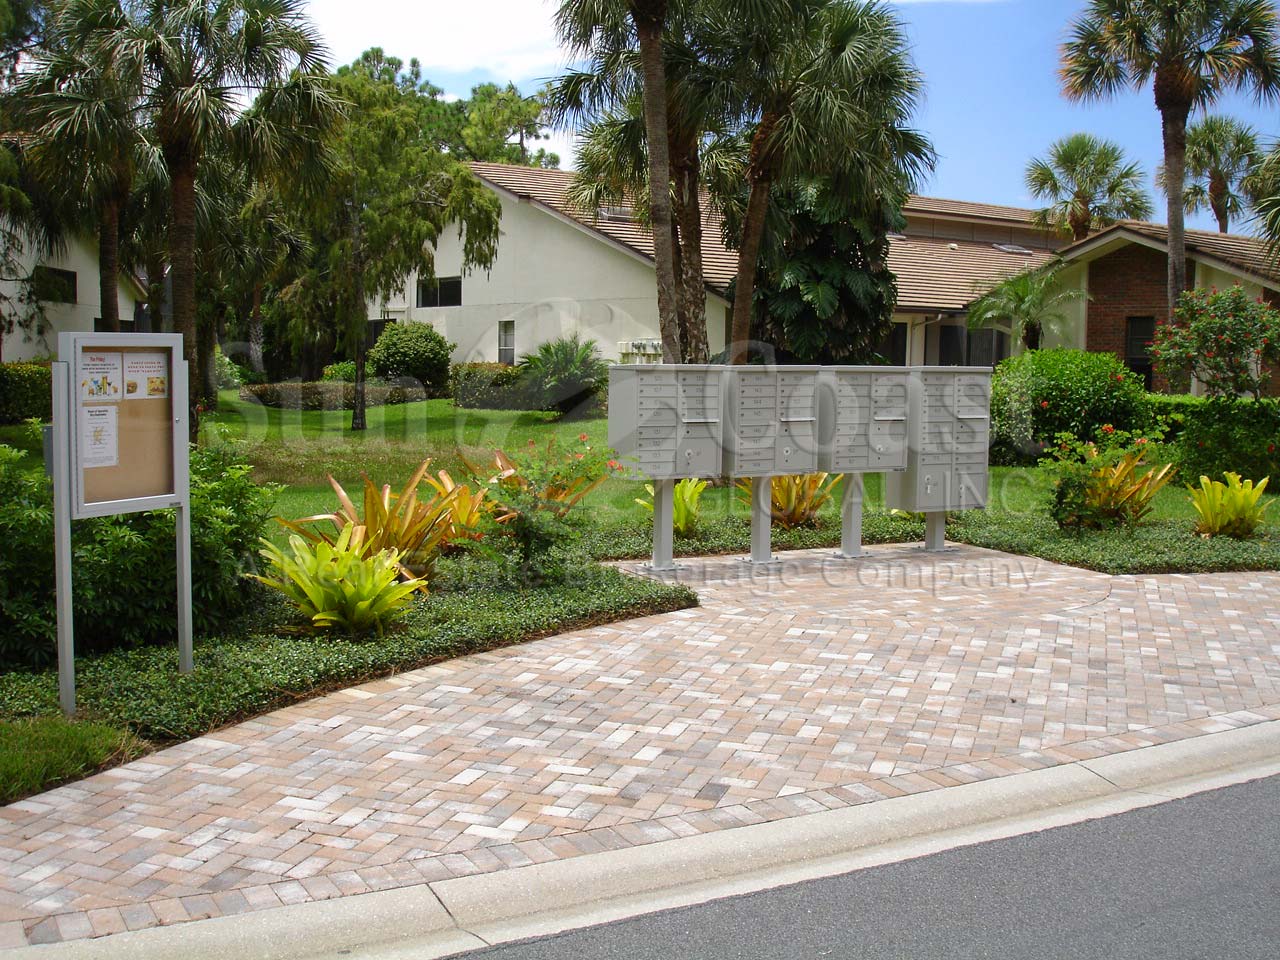 Cypress View Village consists of 2 family attached villas with 2 car garages